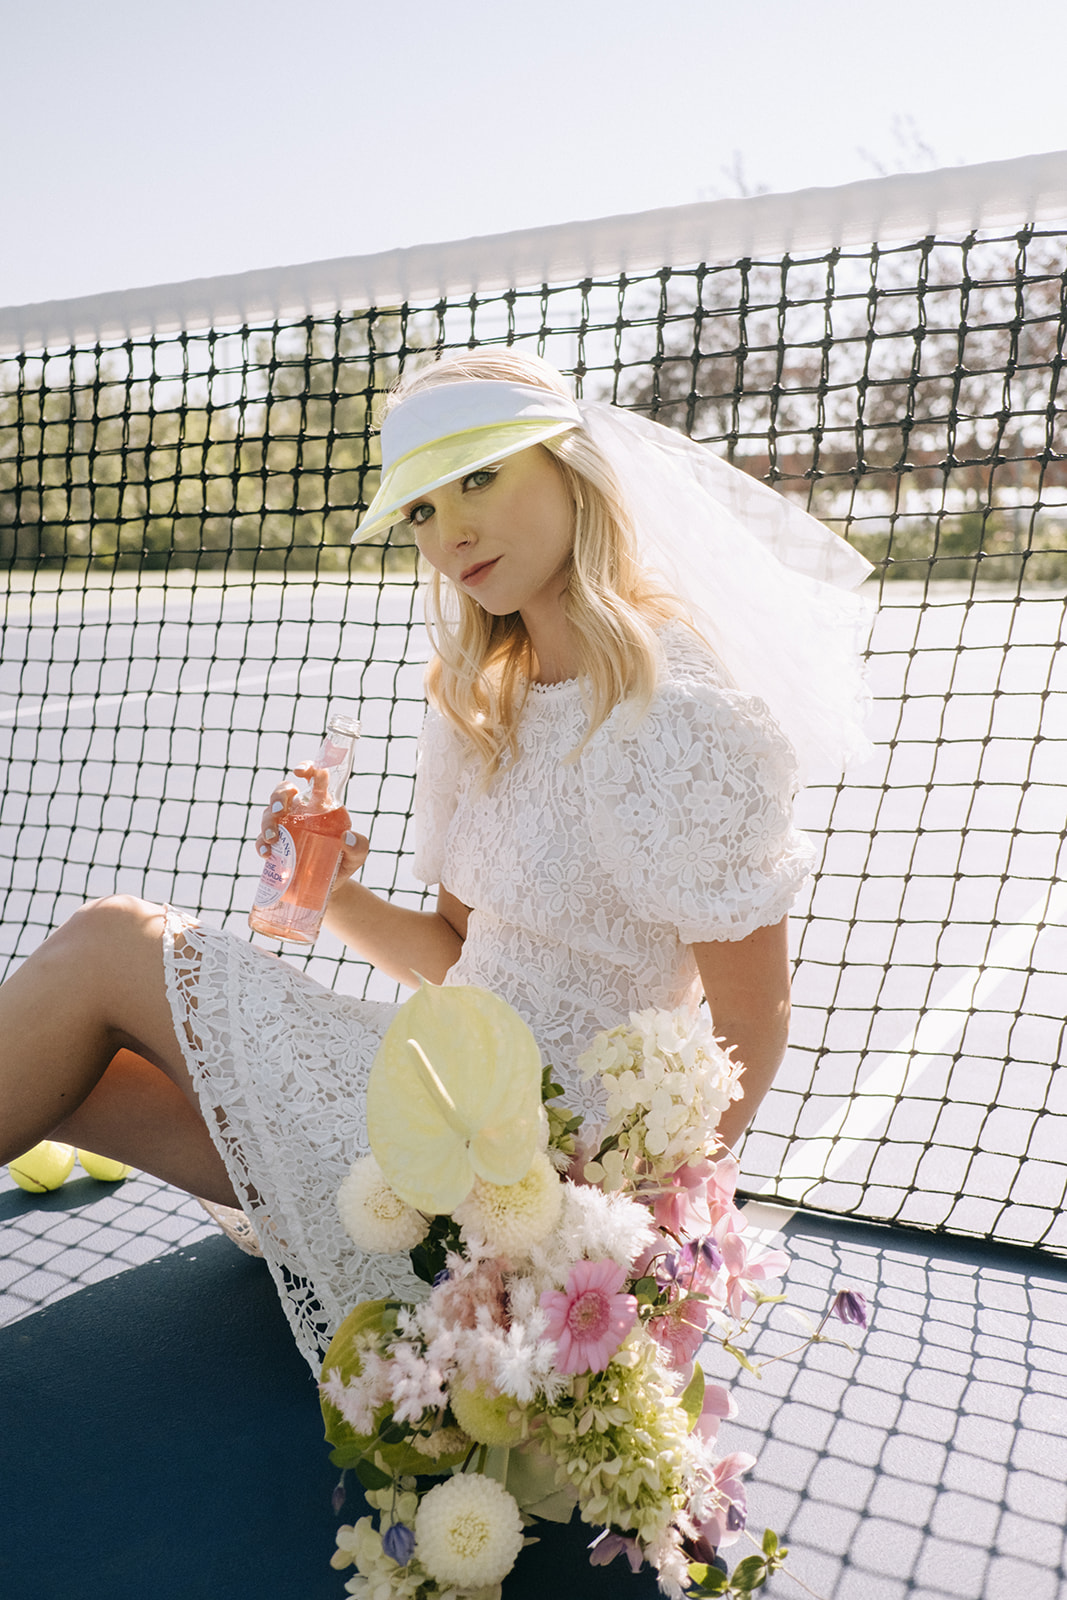 sporty bridal style, Short bridal veil and lululemon yellow tennis visor in this sporty bridal inspiration, spring and summer casual wedding inspiration and ideas